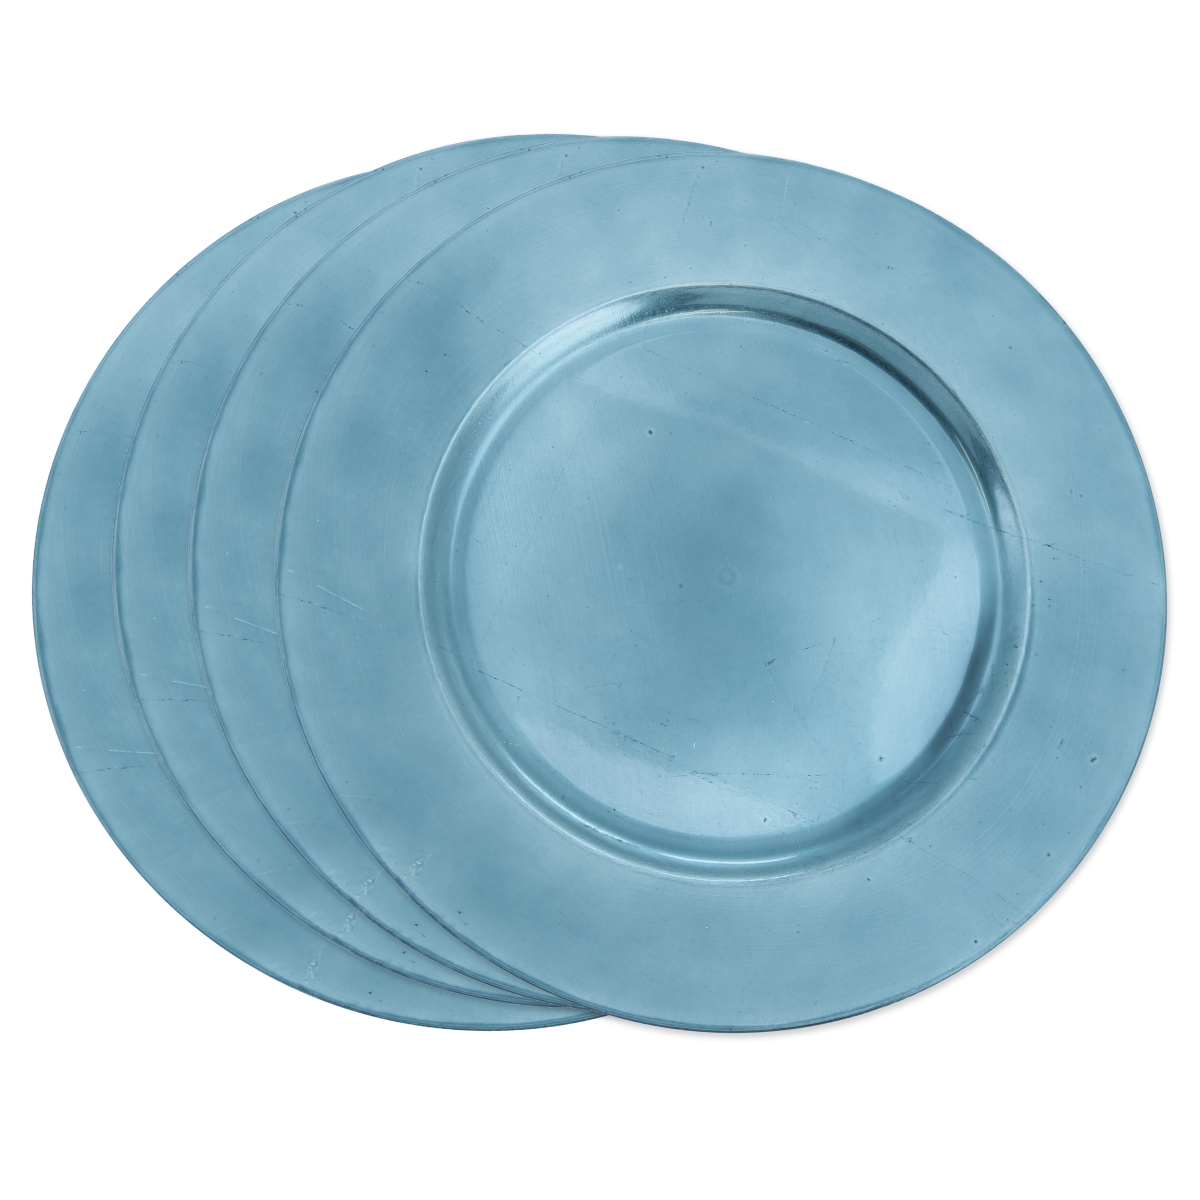 Ch001.te13r 13 In. Round Classic Design Charger Plate - Teal, Set Of 4